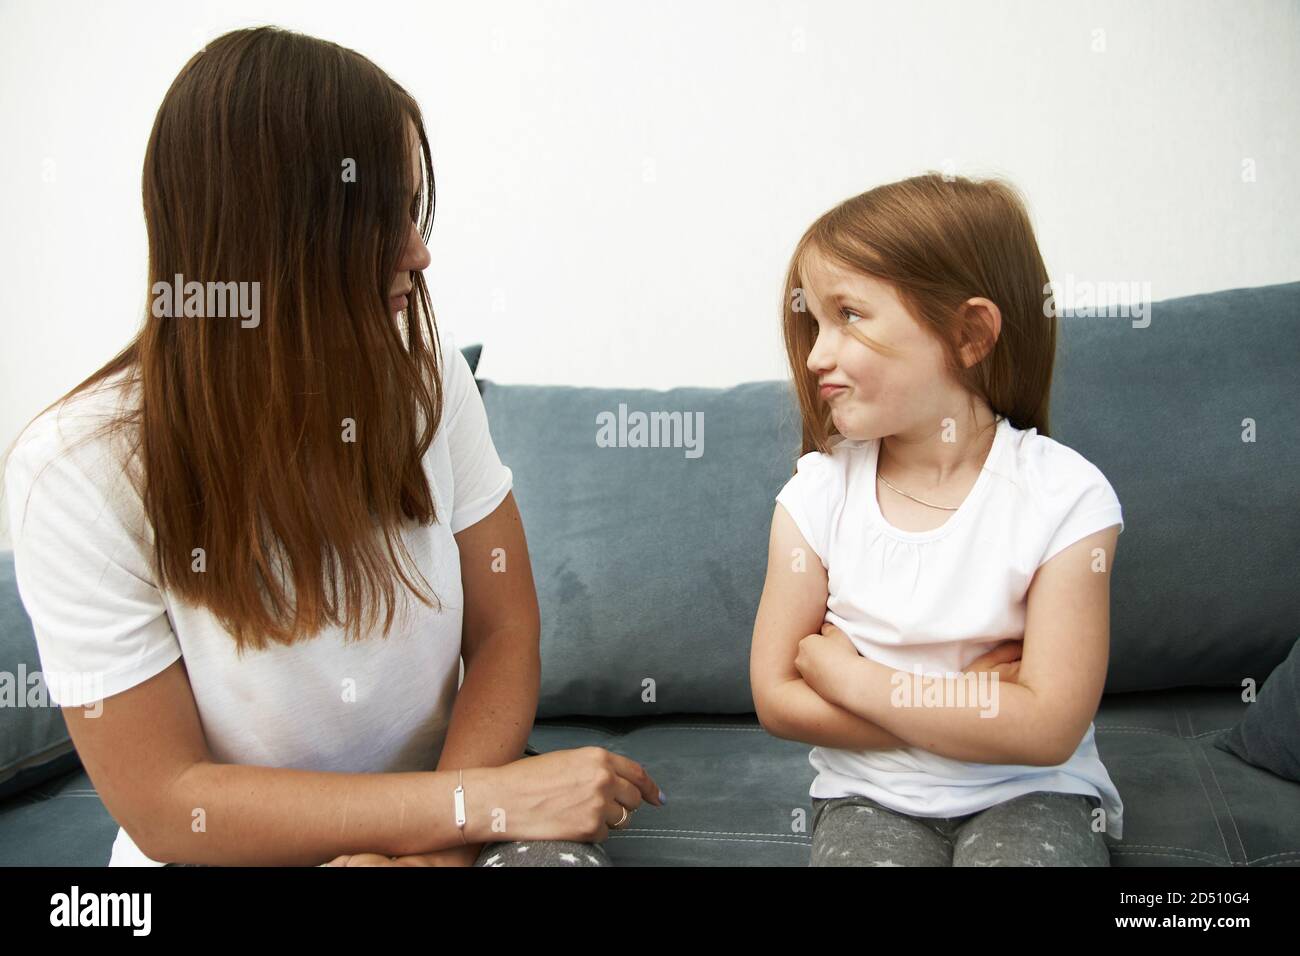 Mother teaches daughter. Mom scolds girl. The litlle girl is offended. Stock Photo